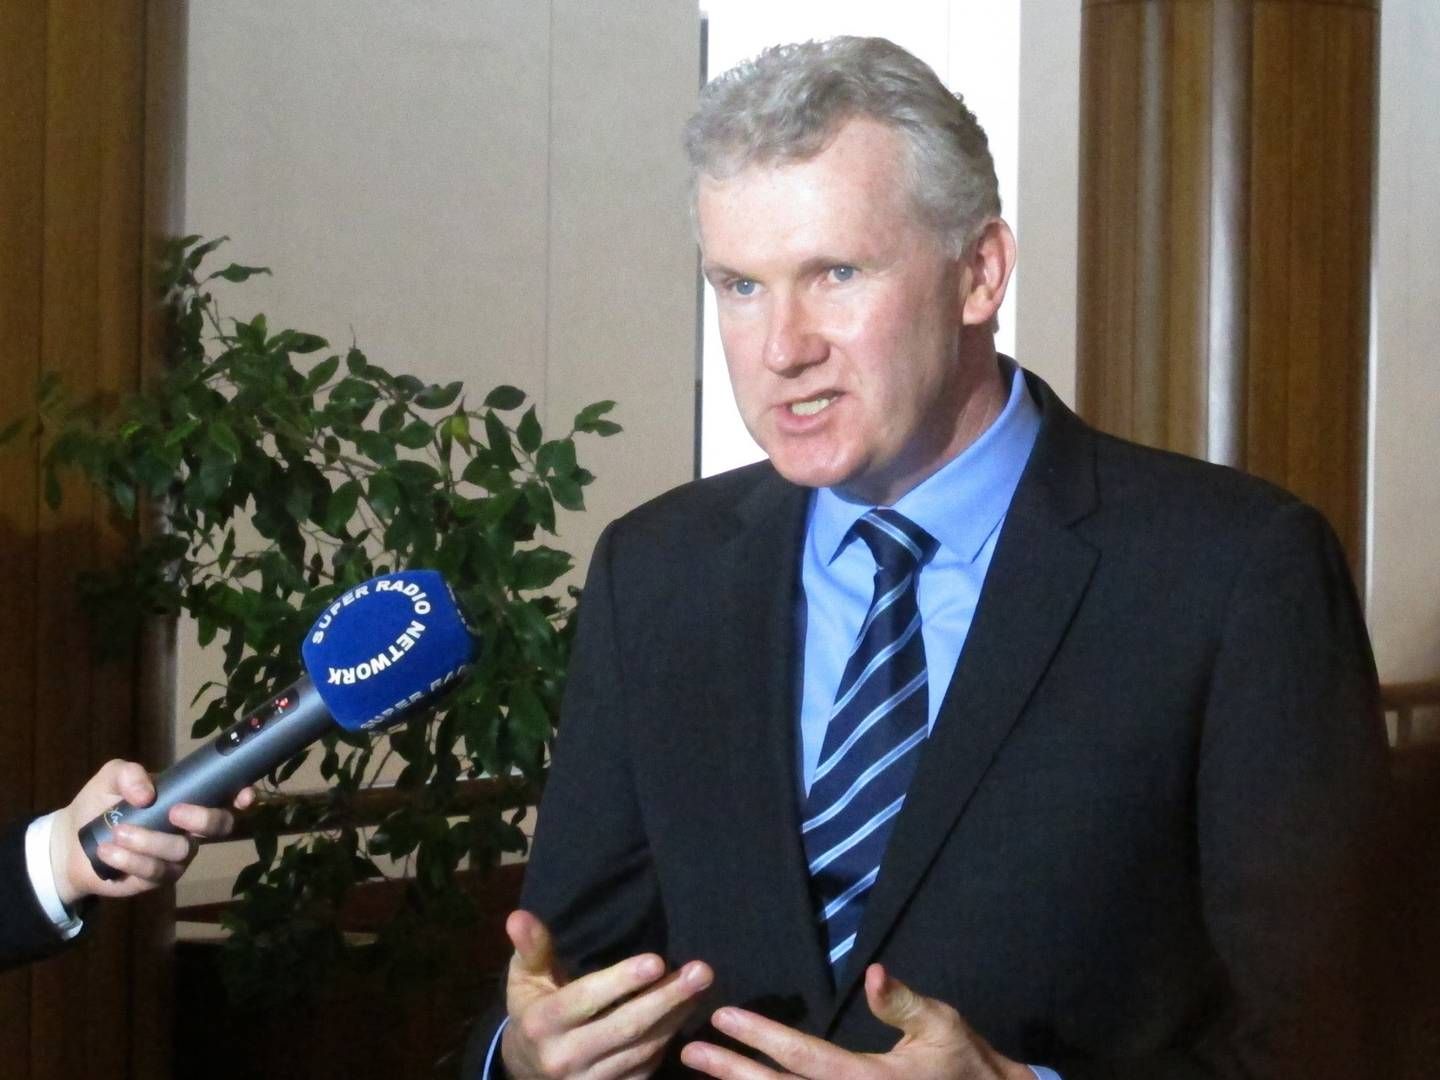 Australian workplace tribunal the Fair Work Commission has summoned Svitzer to a hearing to halt an announced lockout. Employment minister Tony Burke (image) argues that a lockout will cause damage to the Australian economy. | Photo: Rod Mcguirk/AP/Ritzau Scanpix